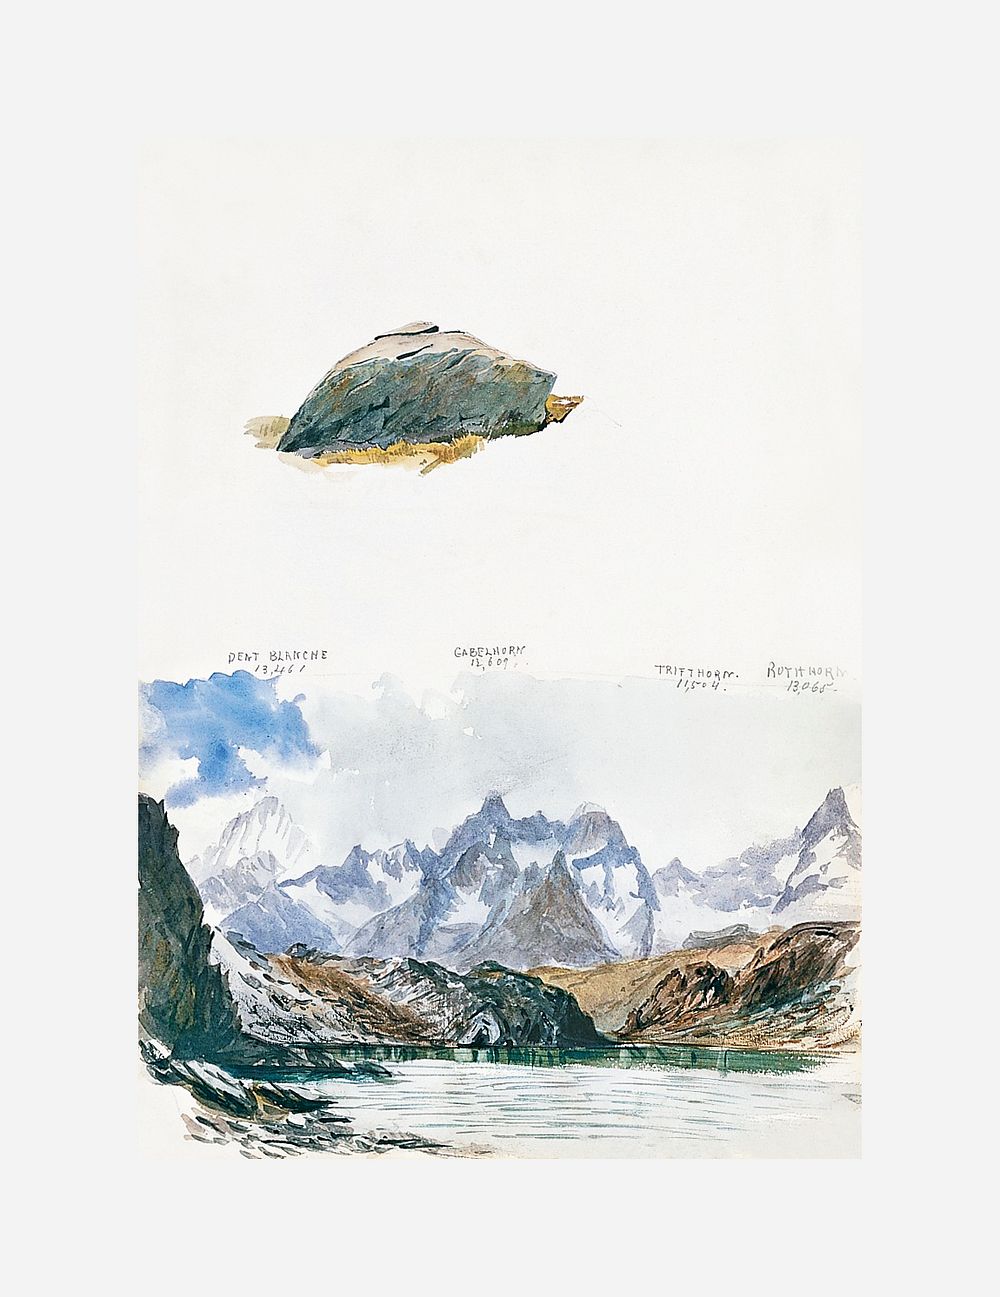 View of Four Mountains from the Gorner Grat, Rock from Splendid Mountain Watercolours Sketchbook (1870) by John Singer…